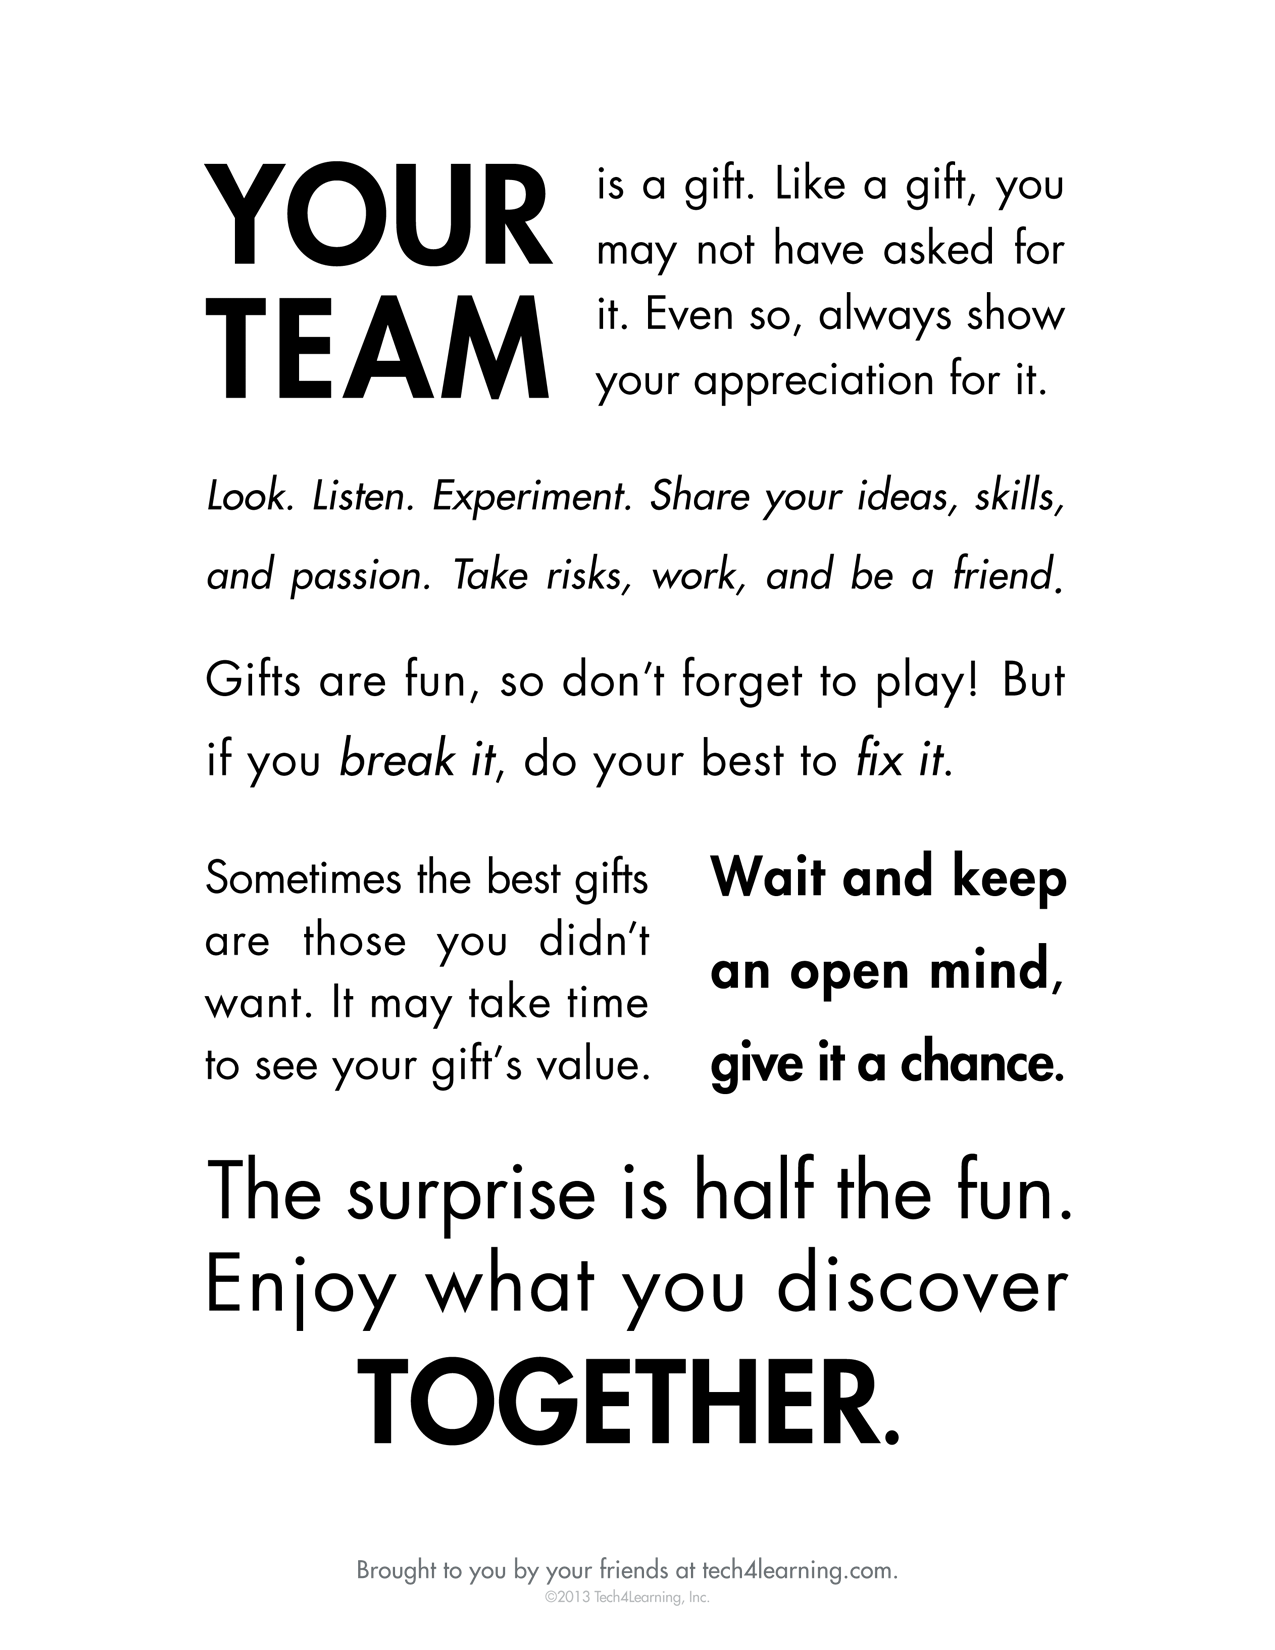 Your Team is a gift